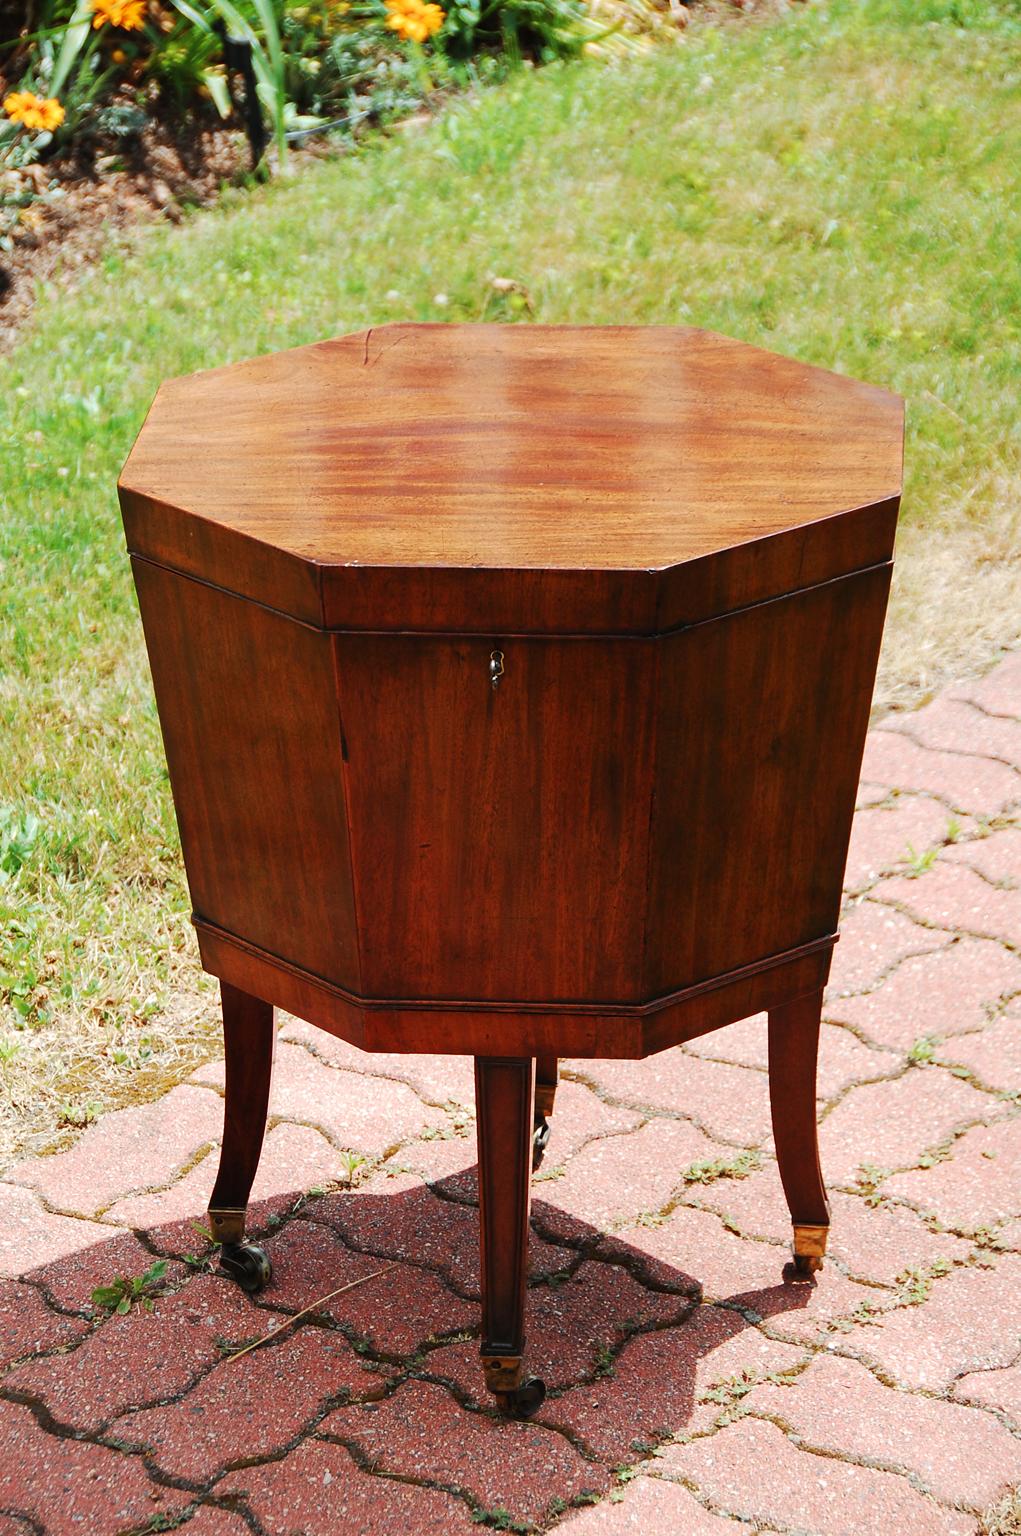 Scottish Georgian mahogany octagonal cellarette on original base. The tapered molded edge legs have an elegant curve to them as they sweep to the brass casters. The hinged top opens to reveal the remnants of the original lead liner. If one wants to